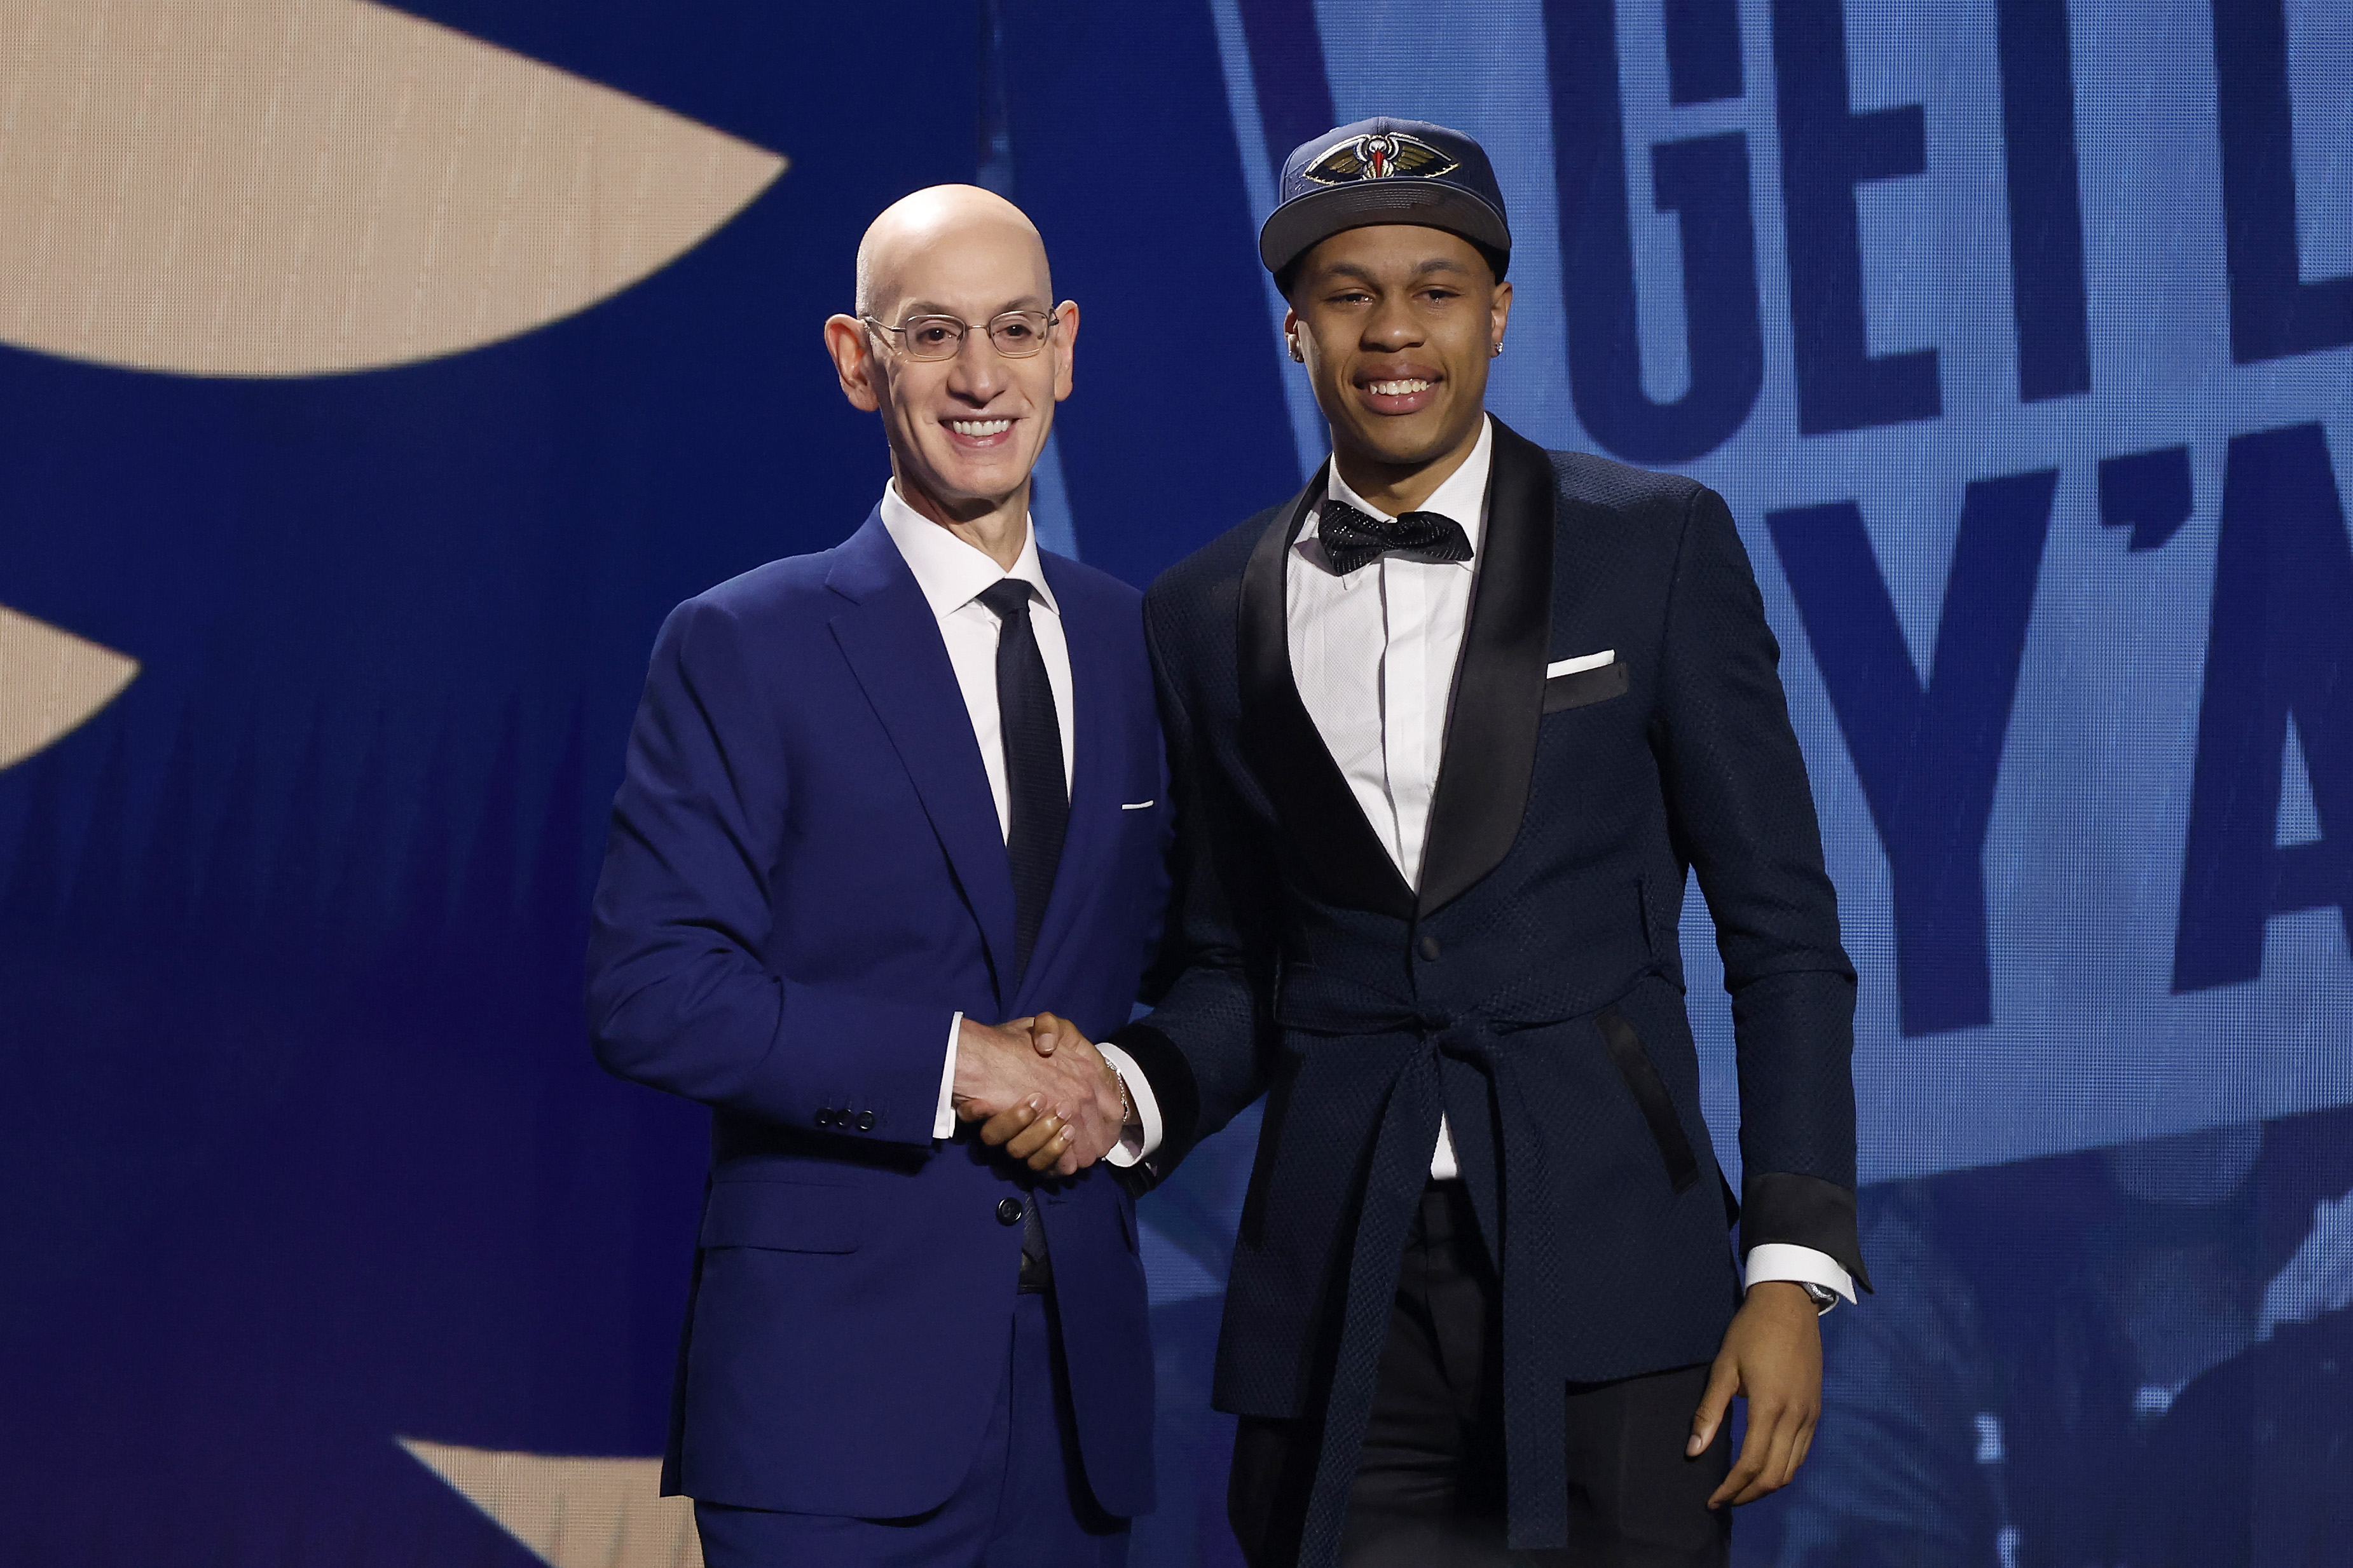 The New Orleans Pelicans select Jordan Hawkins (R) from the University of Connecticut with the 14th pick in the NBA Draft at the Barclays Center in Brooklyn, New York City, June 22, 2023. /CFP